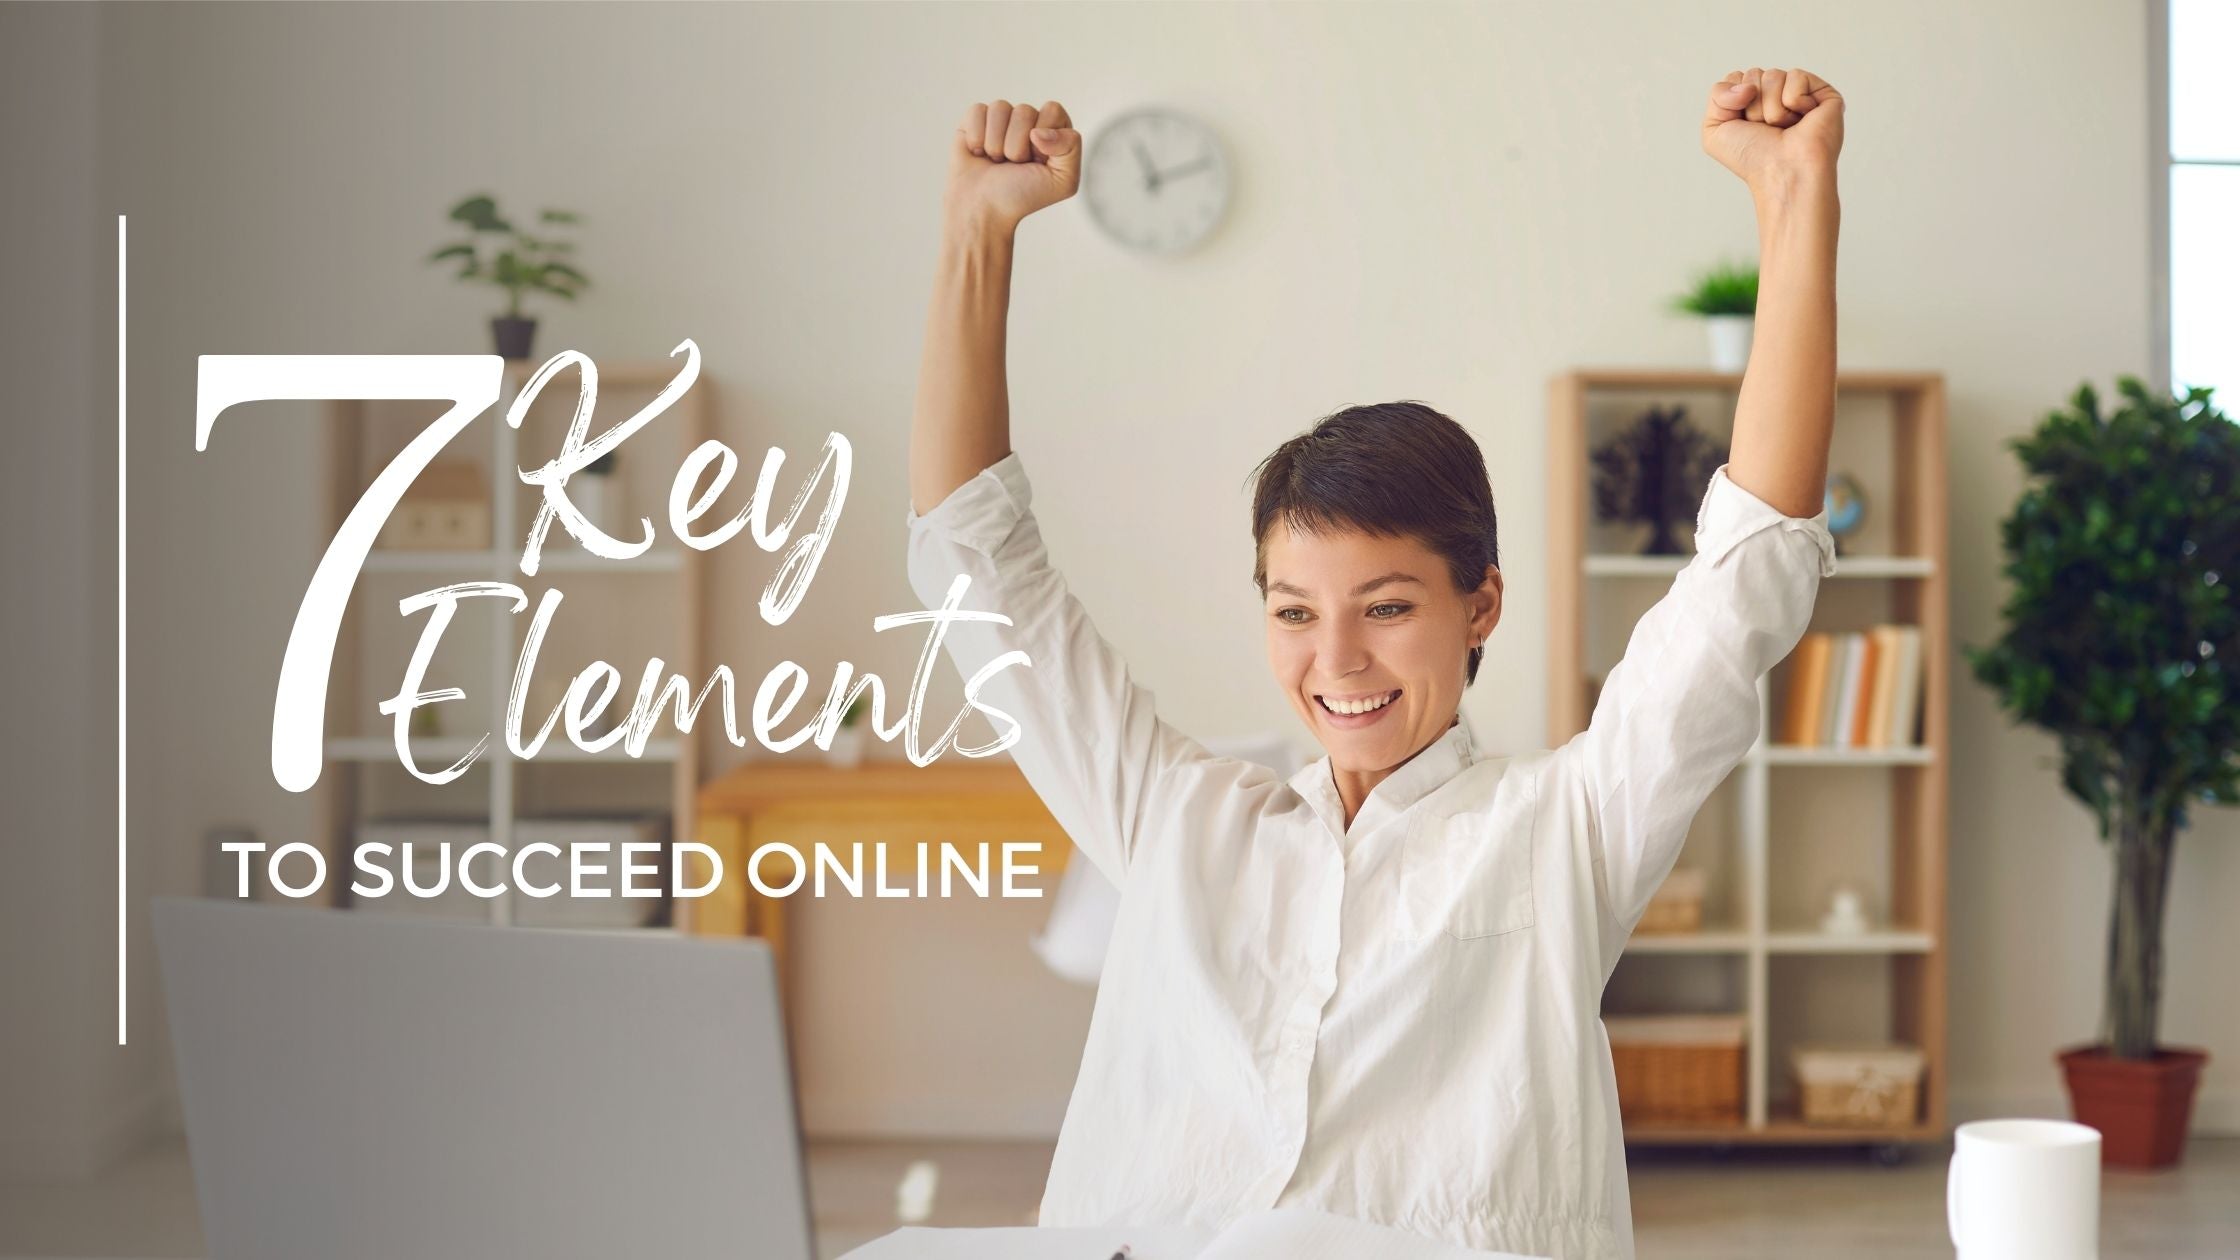 The 7 Key Elements to build your success online!